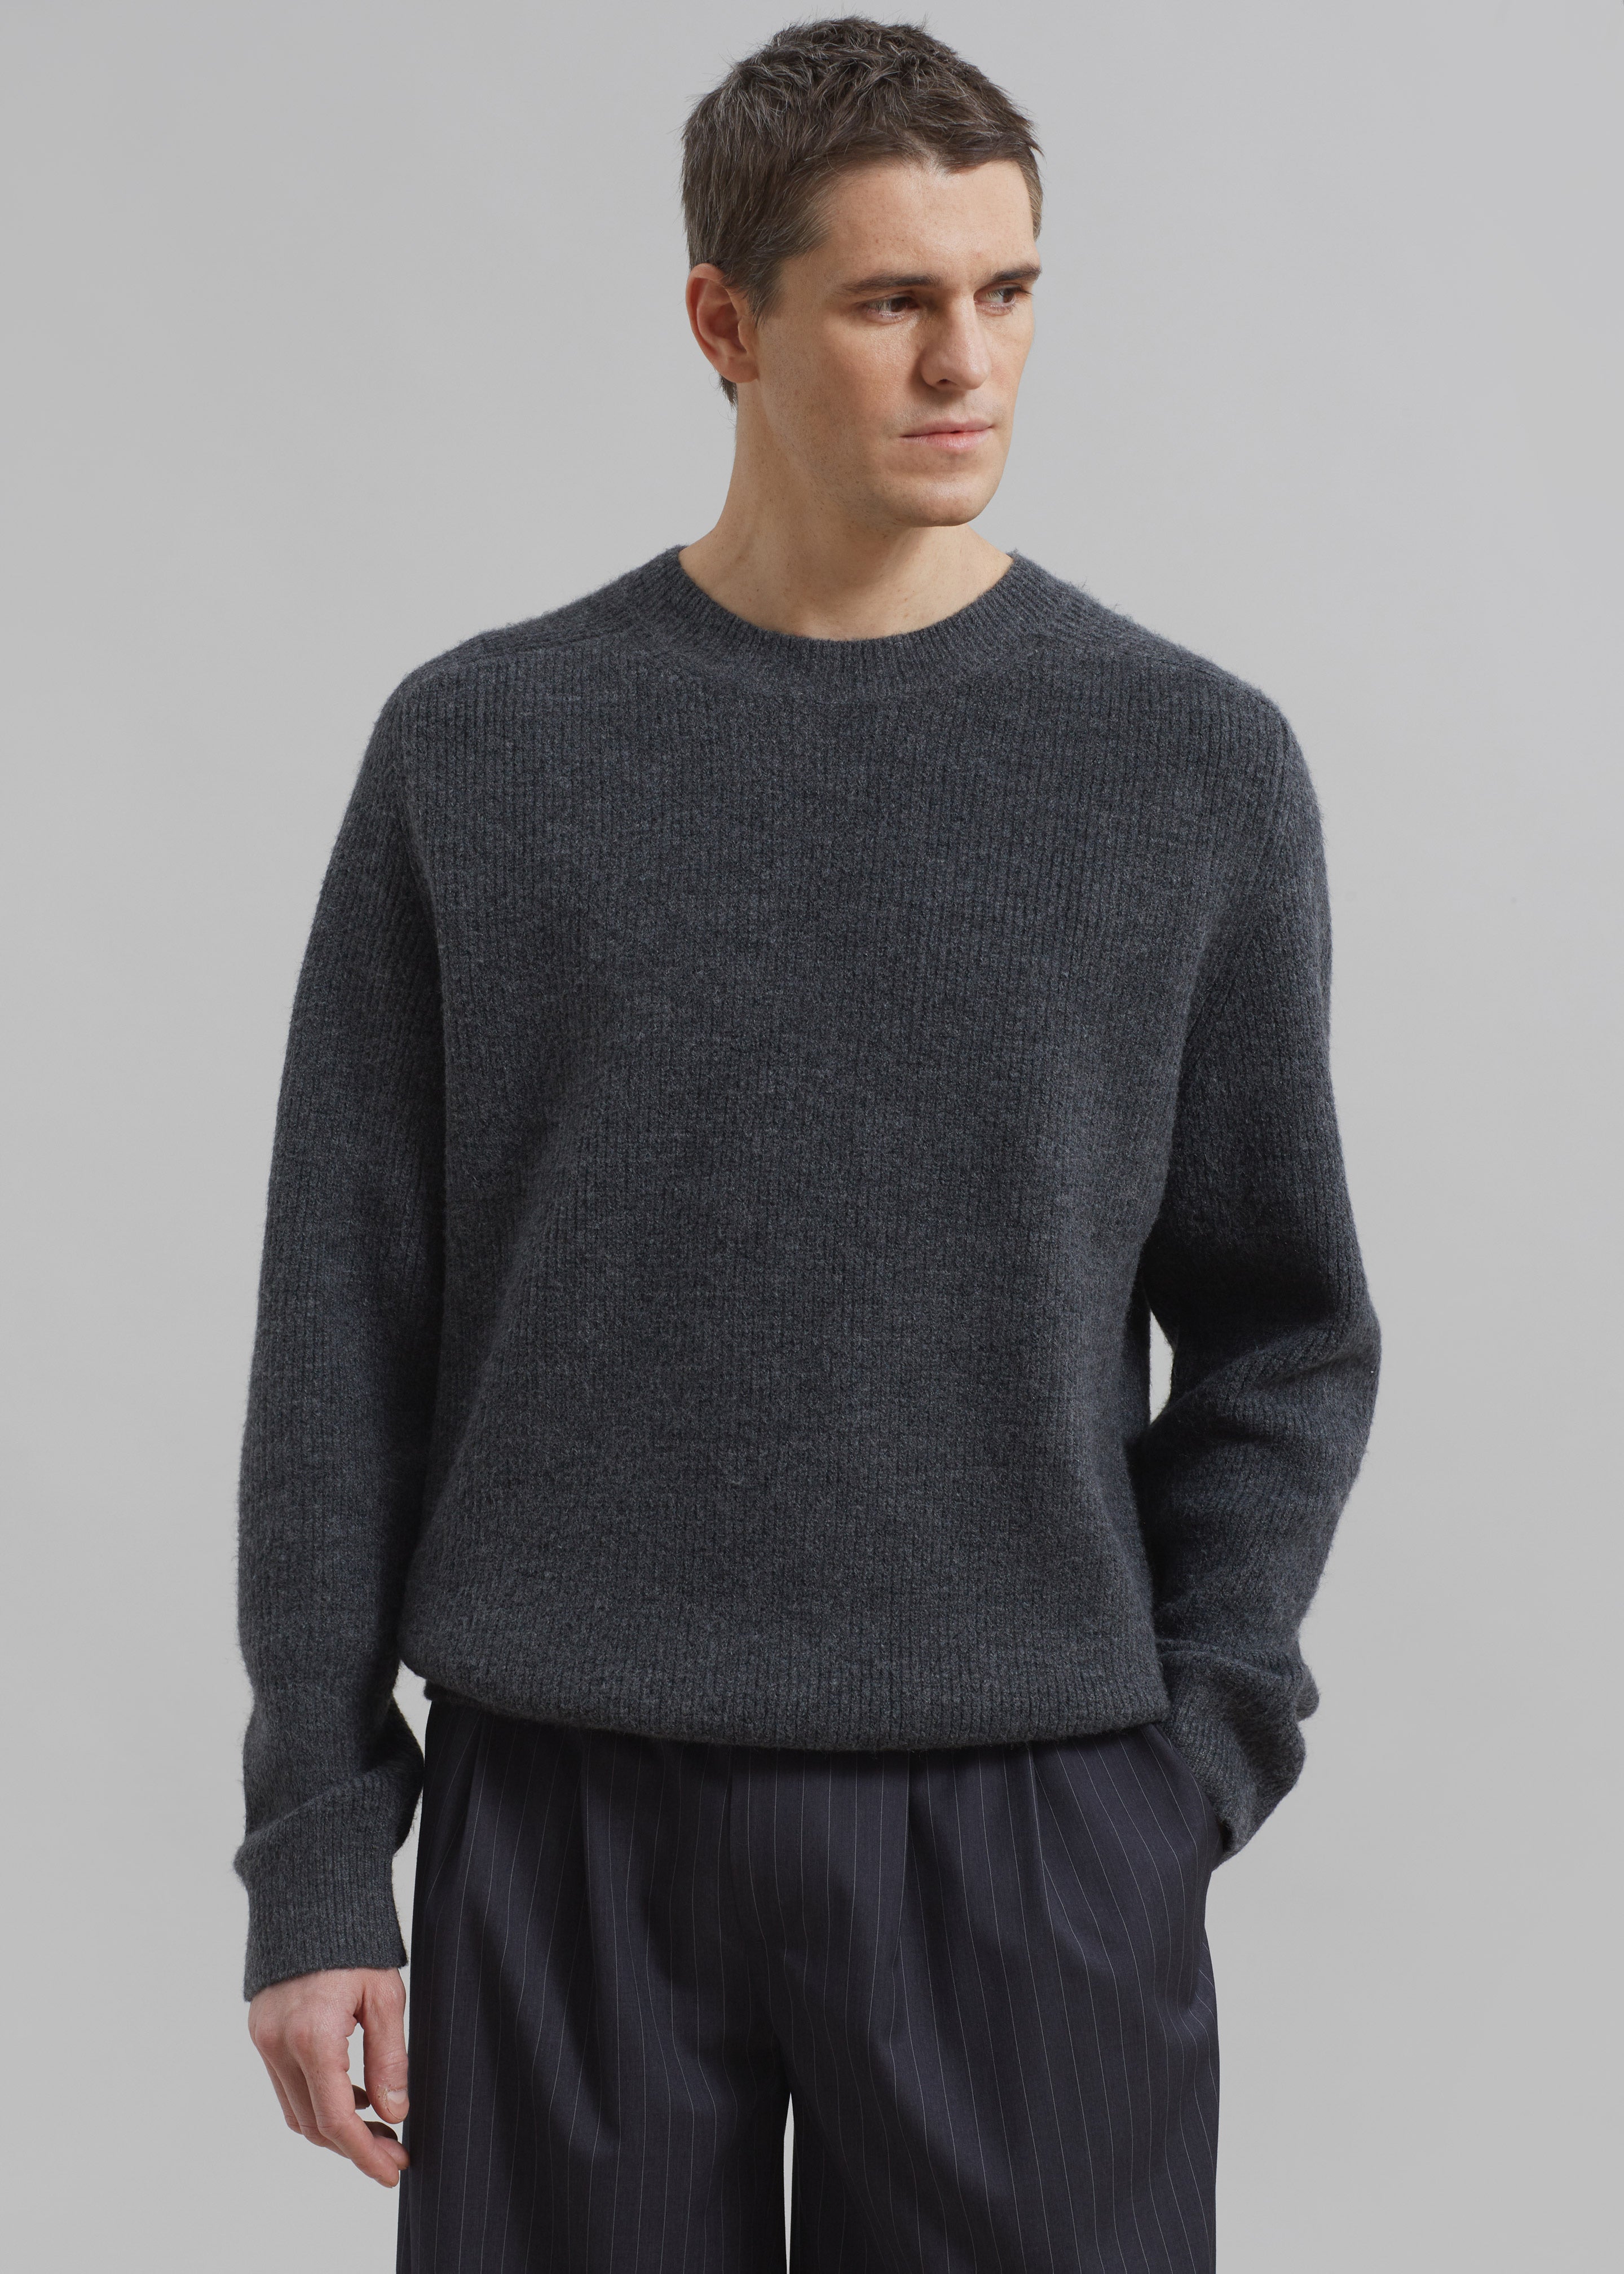 Emory Sweater - Charcoal - 15